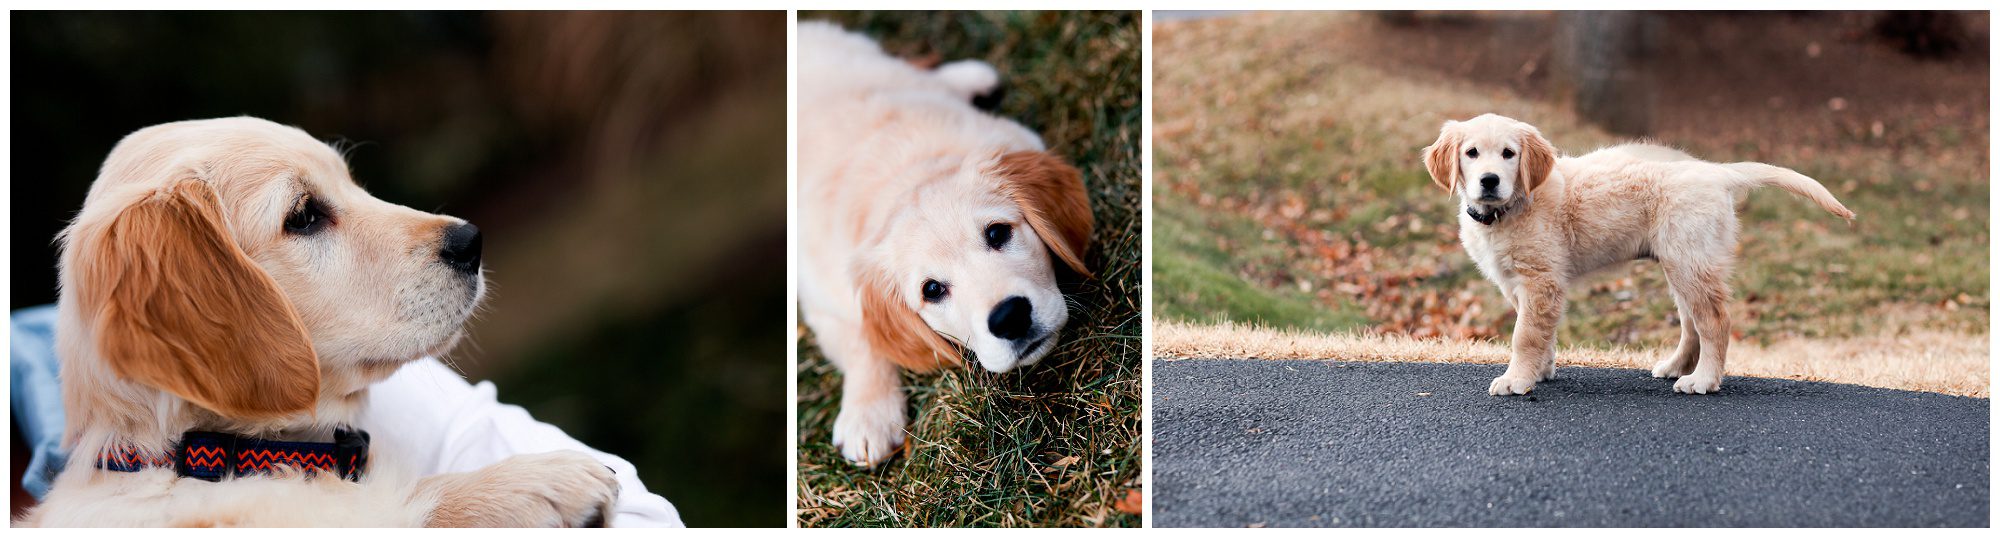 Golden Retriever Puppy Portraits Charlottesville pet photographer pictures central virginia dog residence albemarle photography animal winter